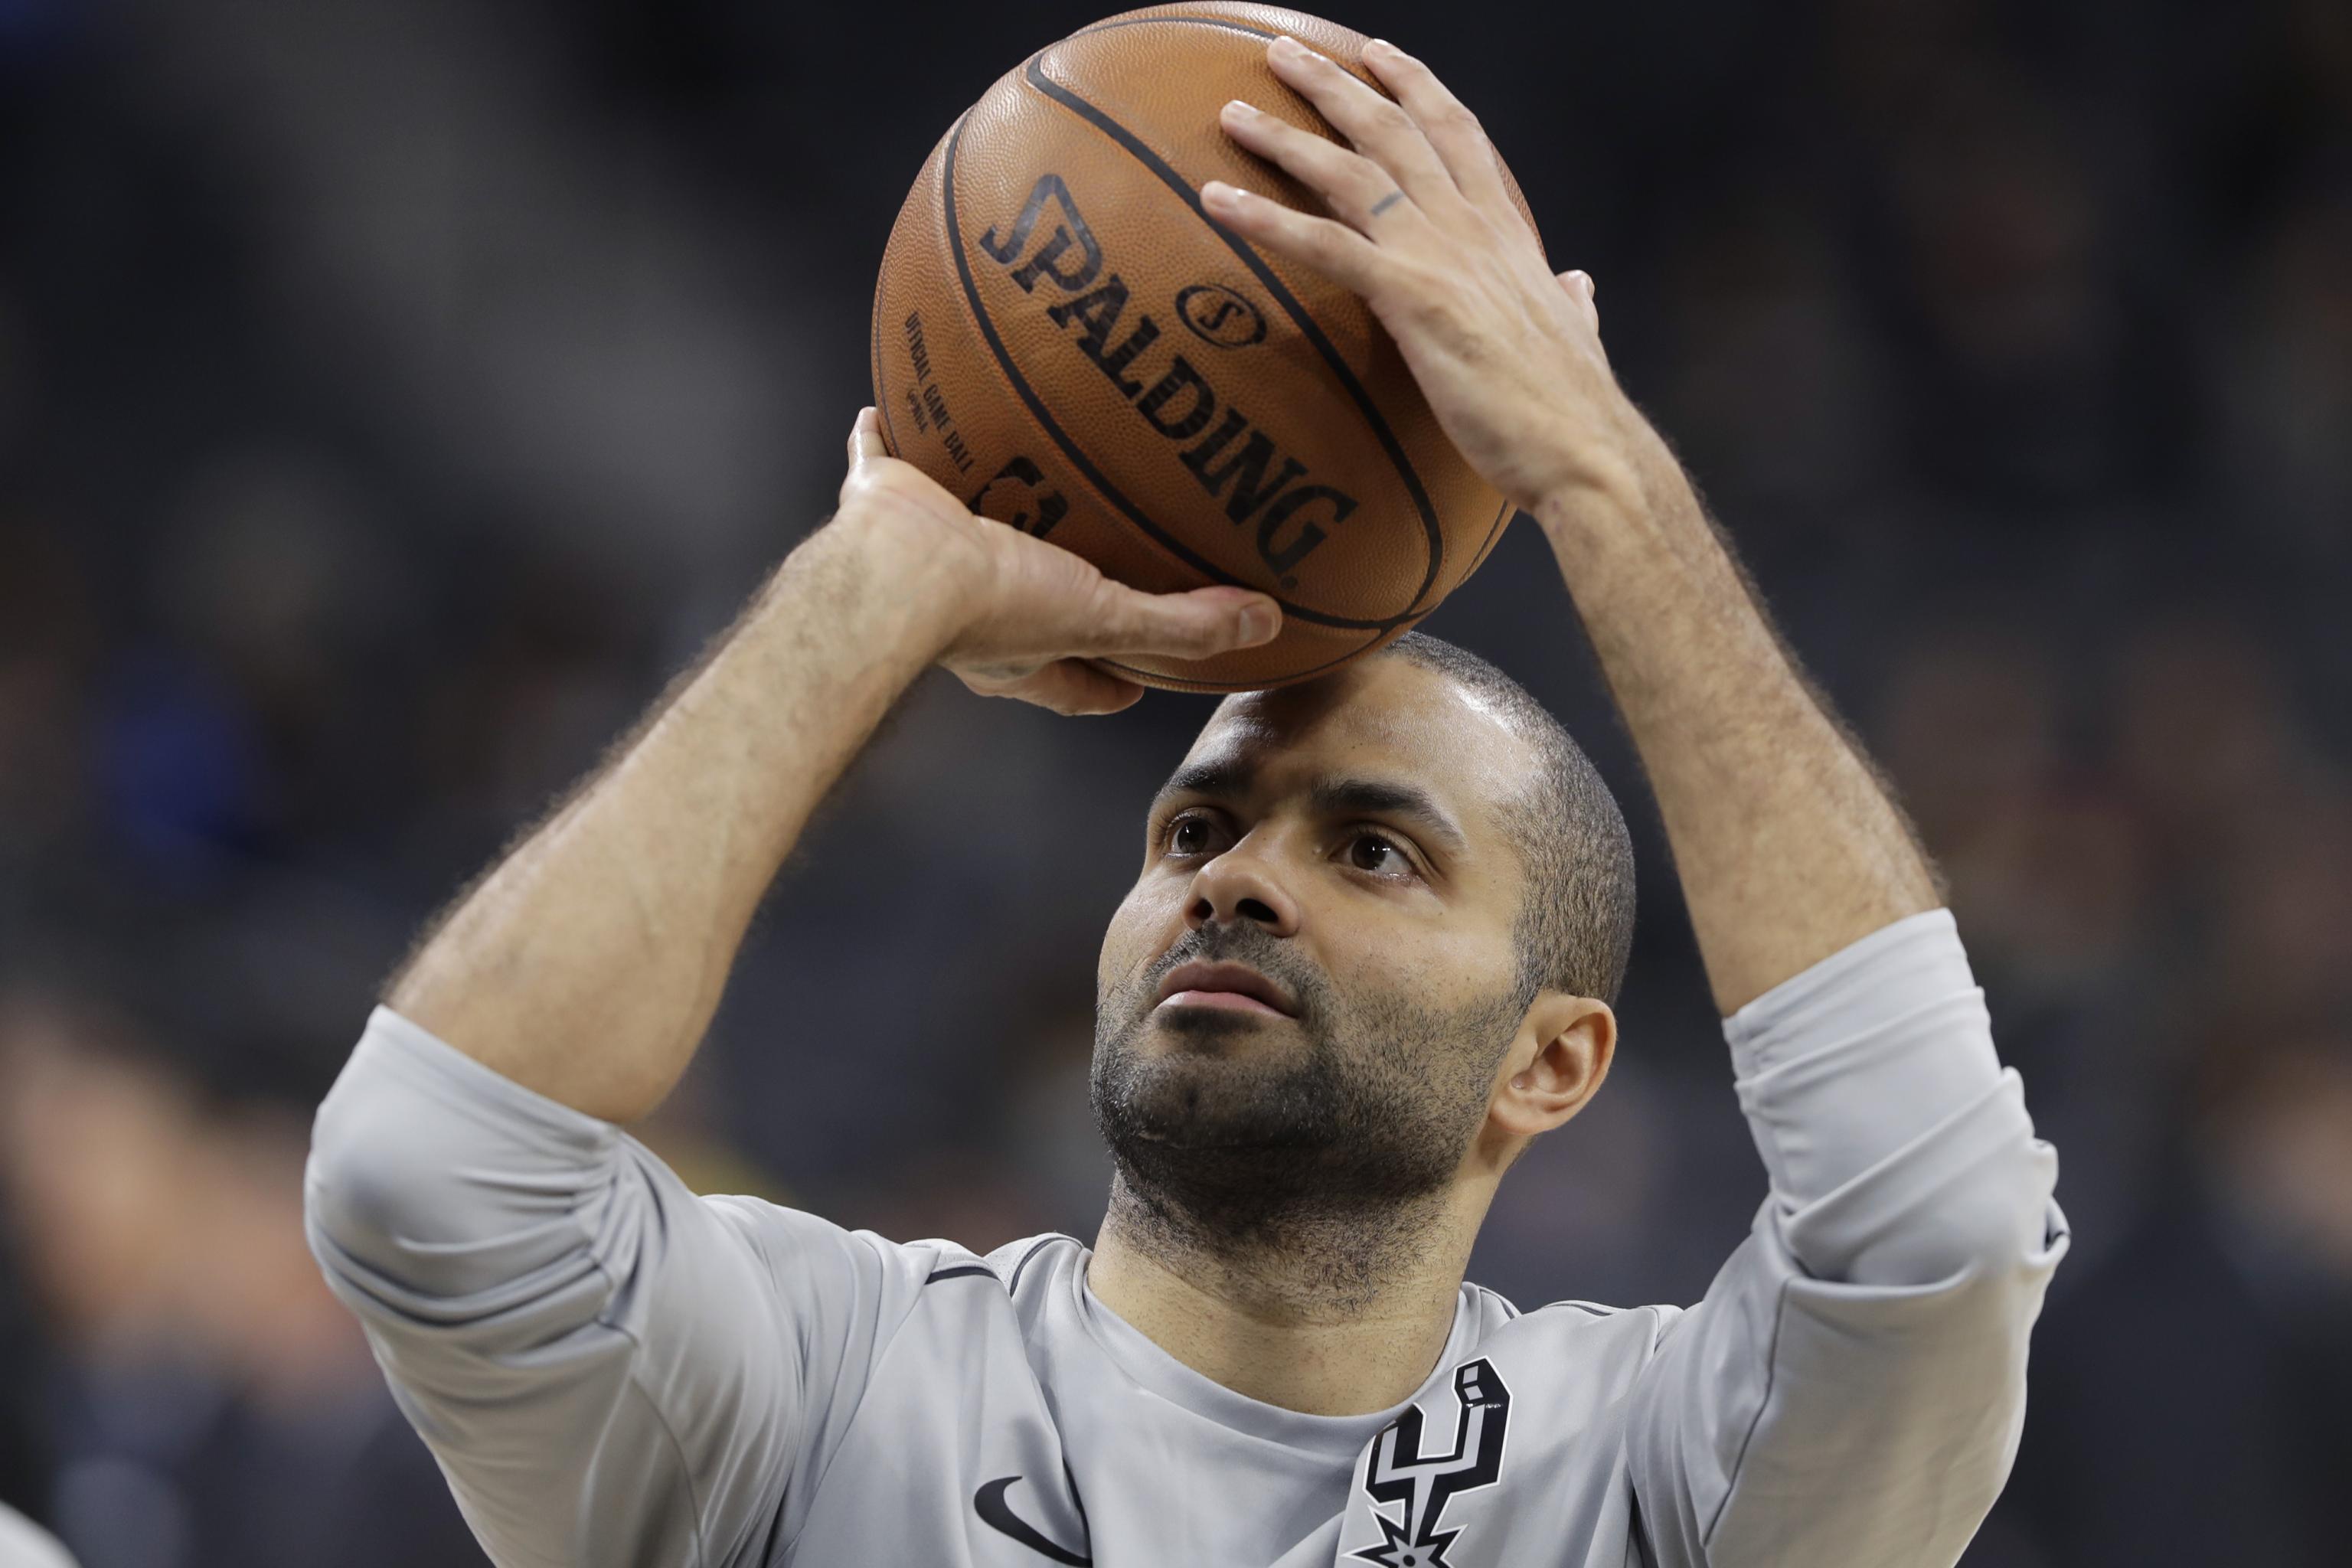 Tony Parker says he's retiring from NBA after 18 seasons